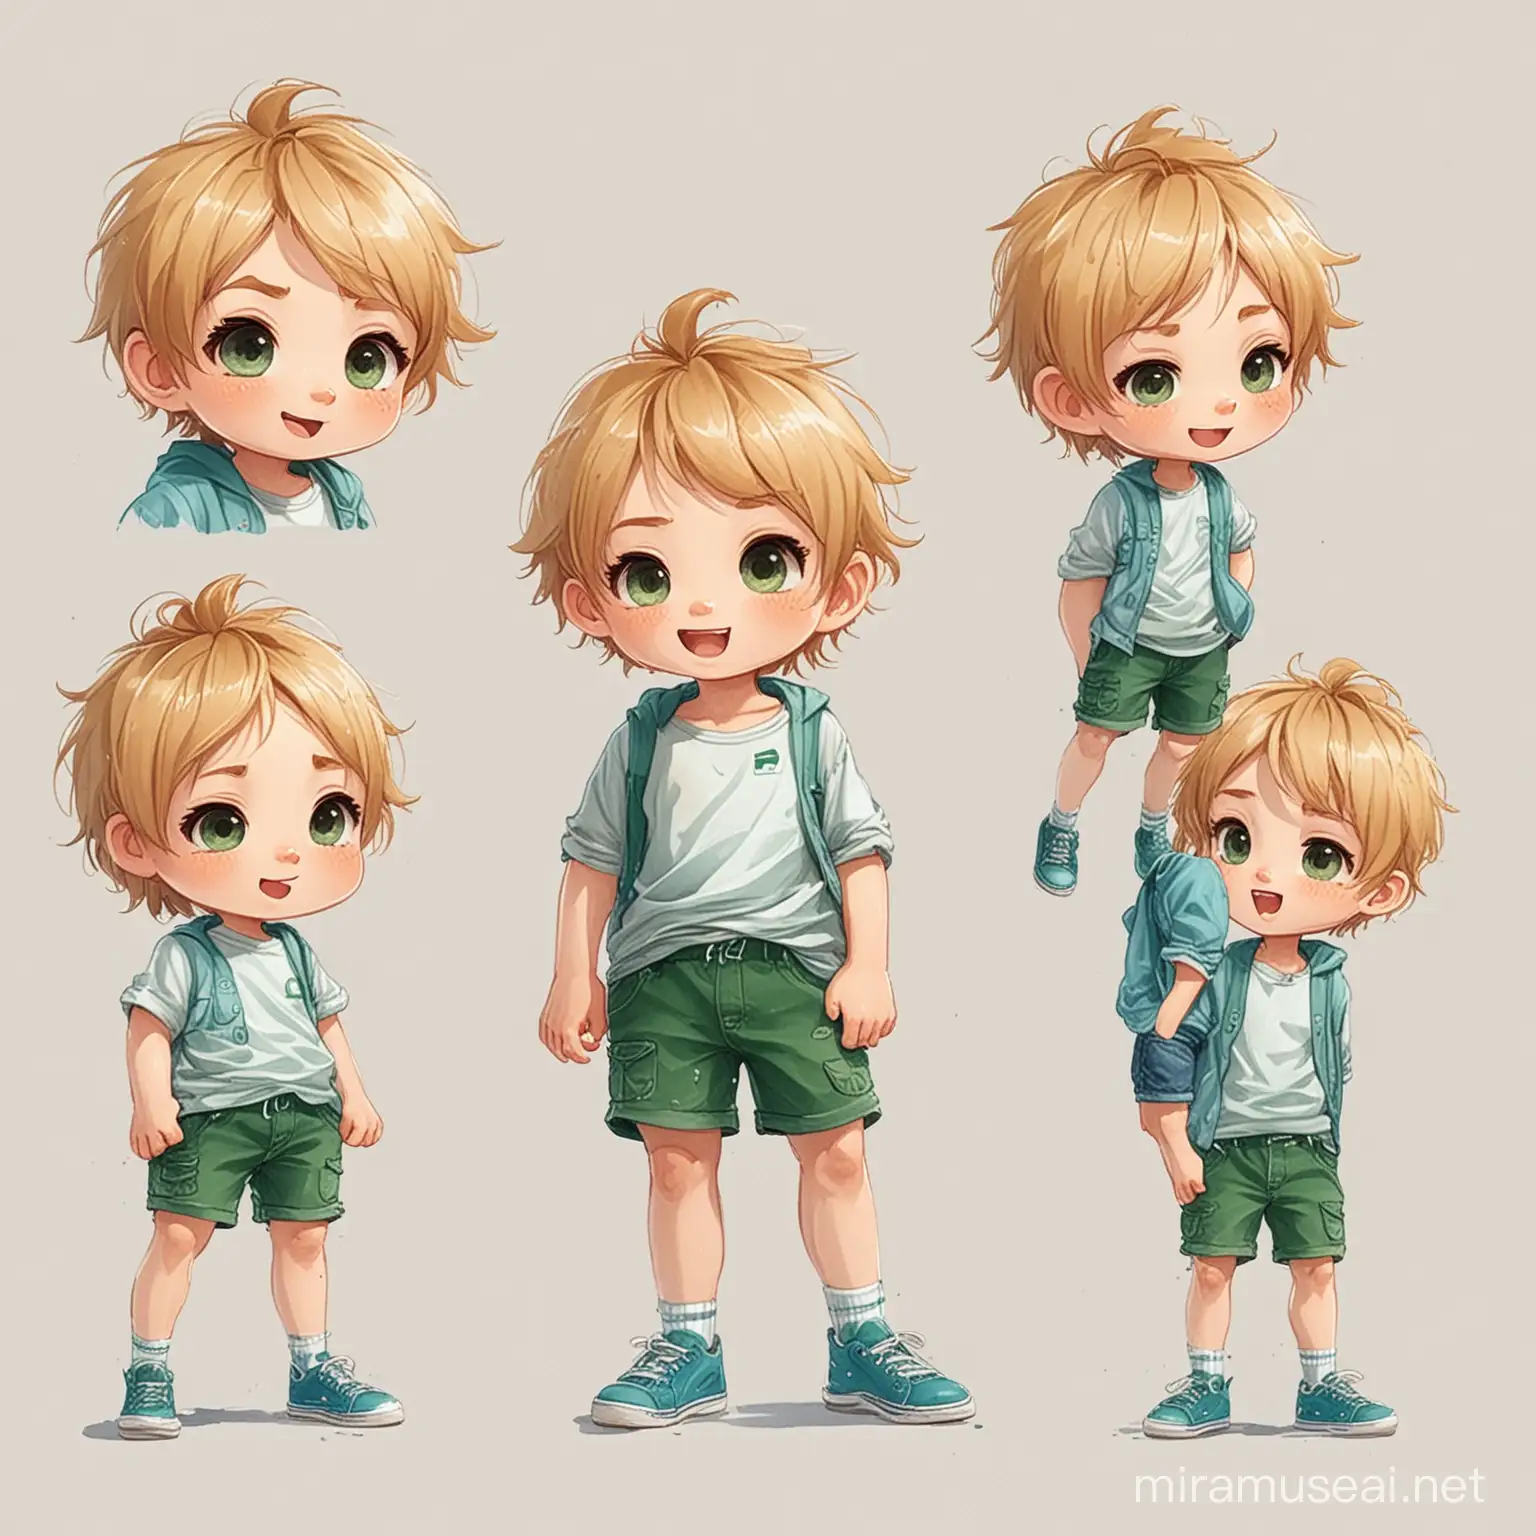 Adorable Chibi Boy in Various Poses and Expressions on White Background